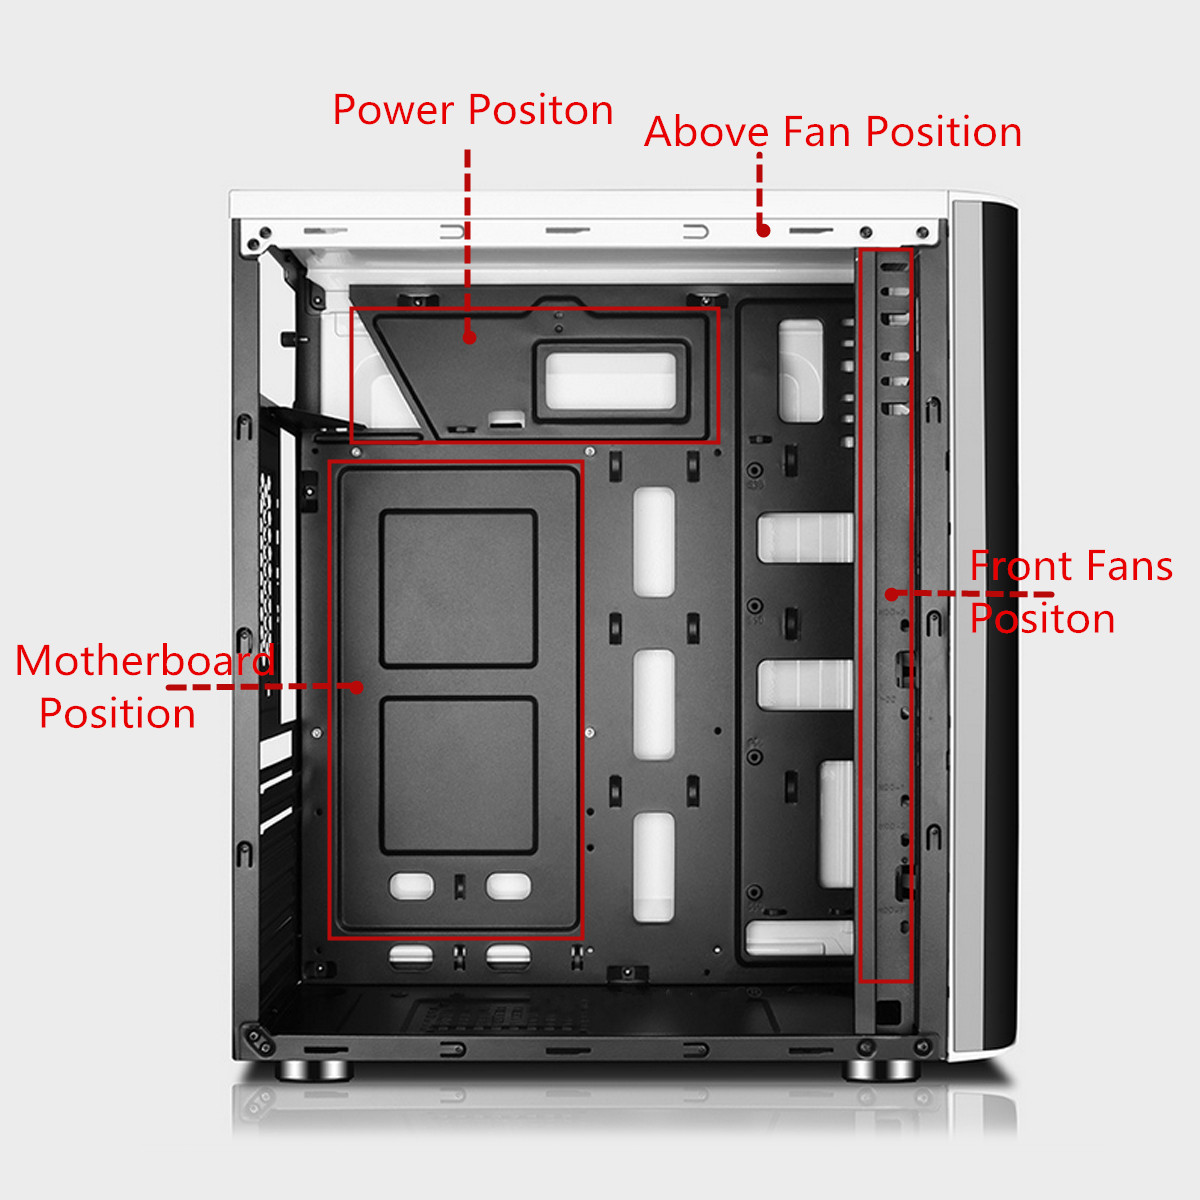 403818cm-USB30-Transparent-Gaming-Computer-Case-Support-5-Fans-Chassis-for-ATXM-ATXMini-ITX-1372746